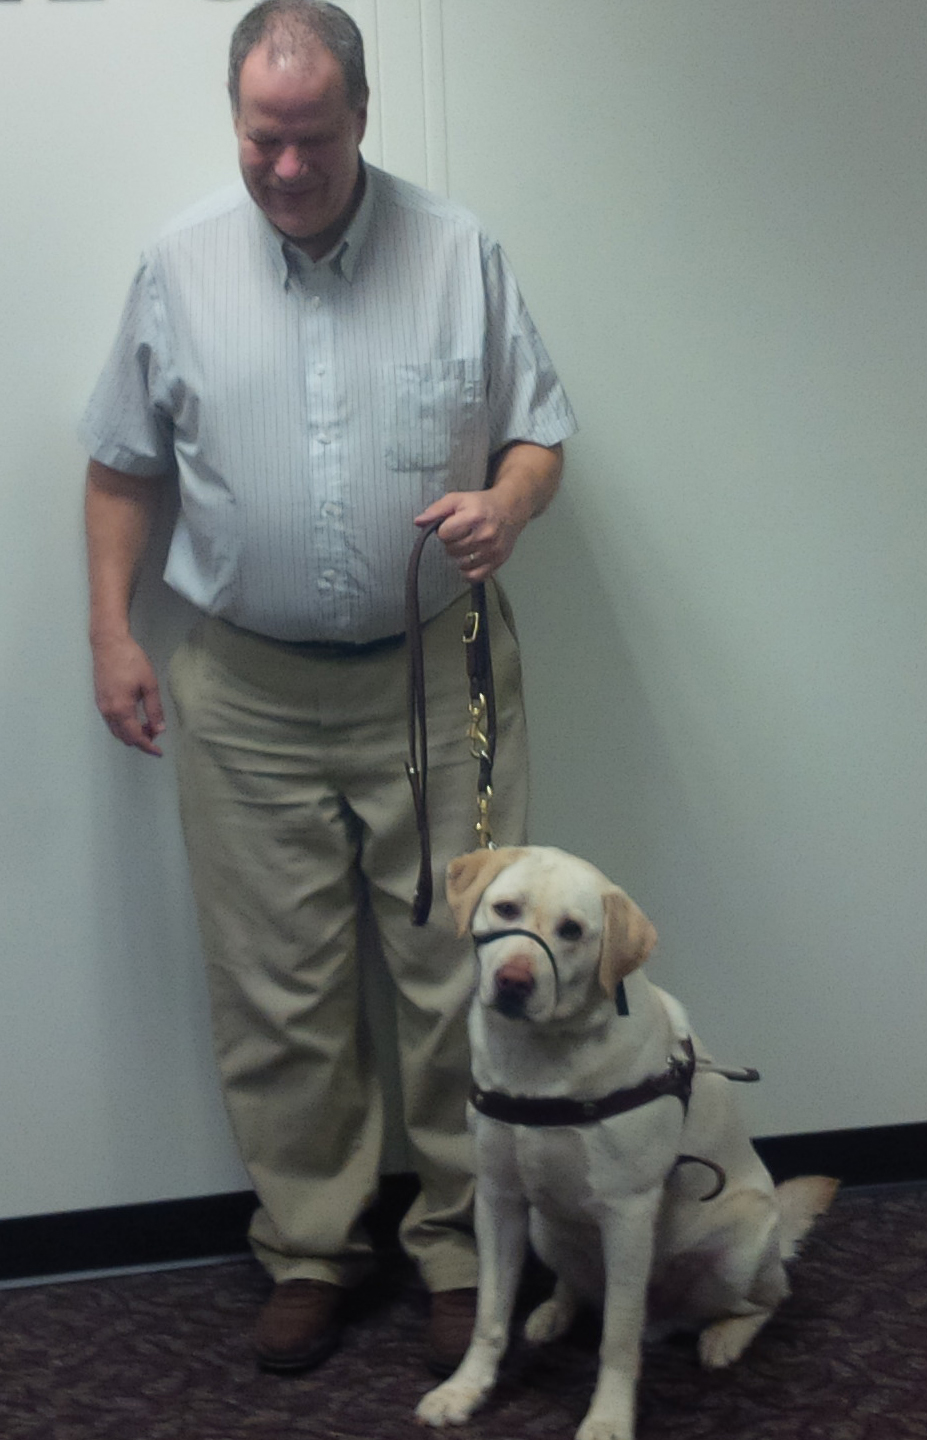 Odie the dog and Brian his handler